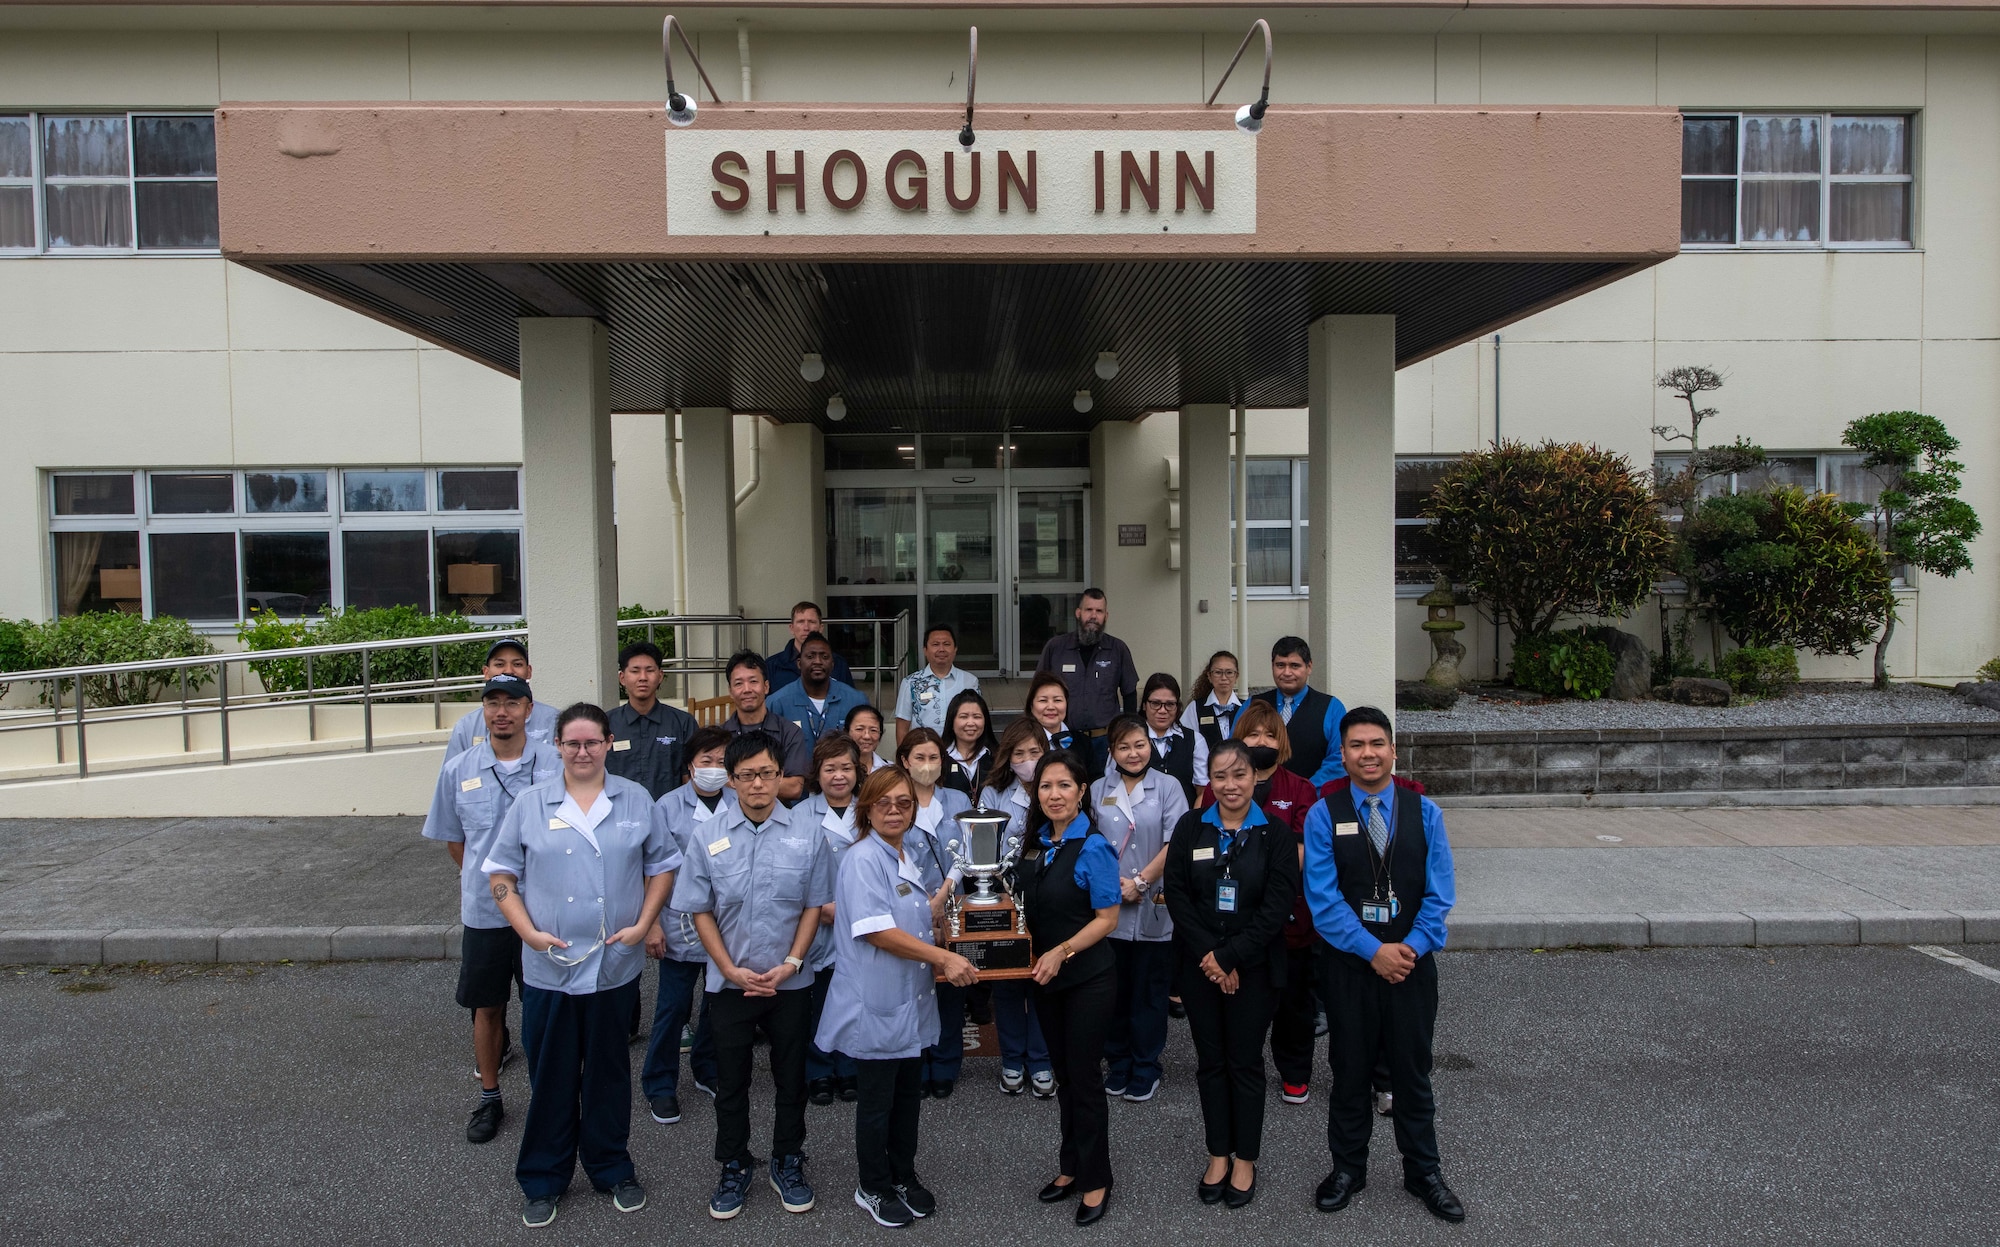 A group of Shogun Inn staff pose for a photo with the 2023 Innkeeper Award.